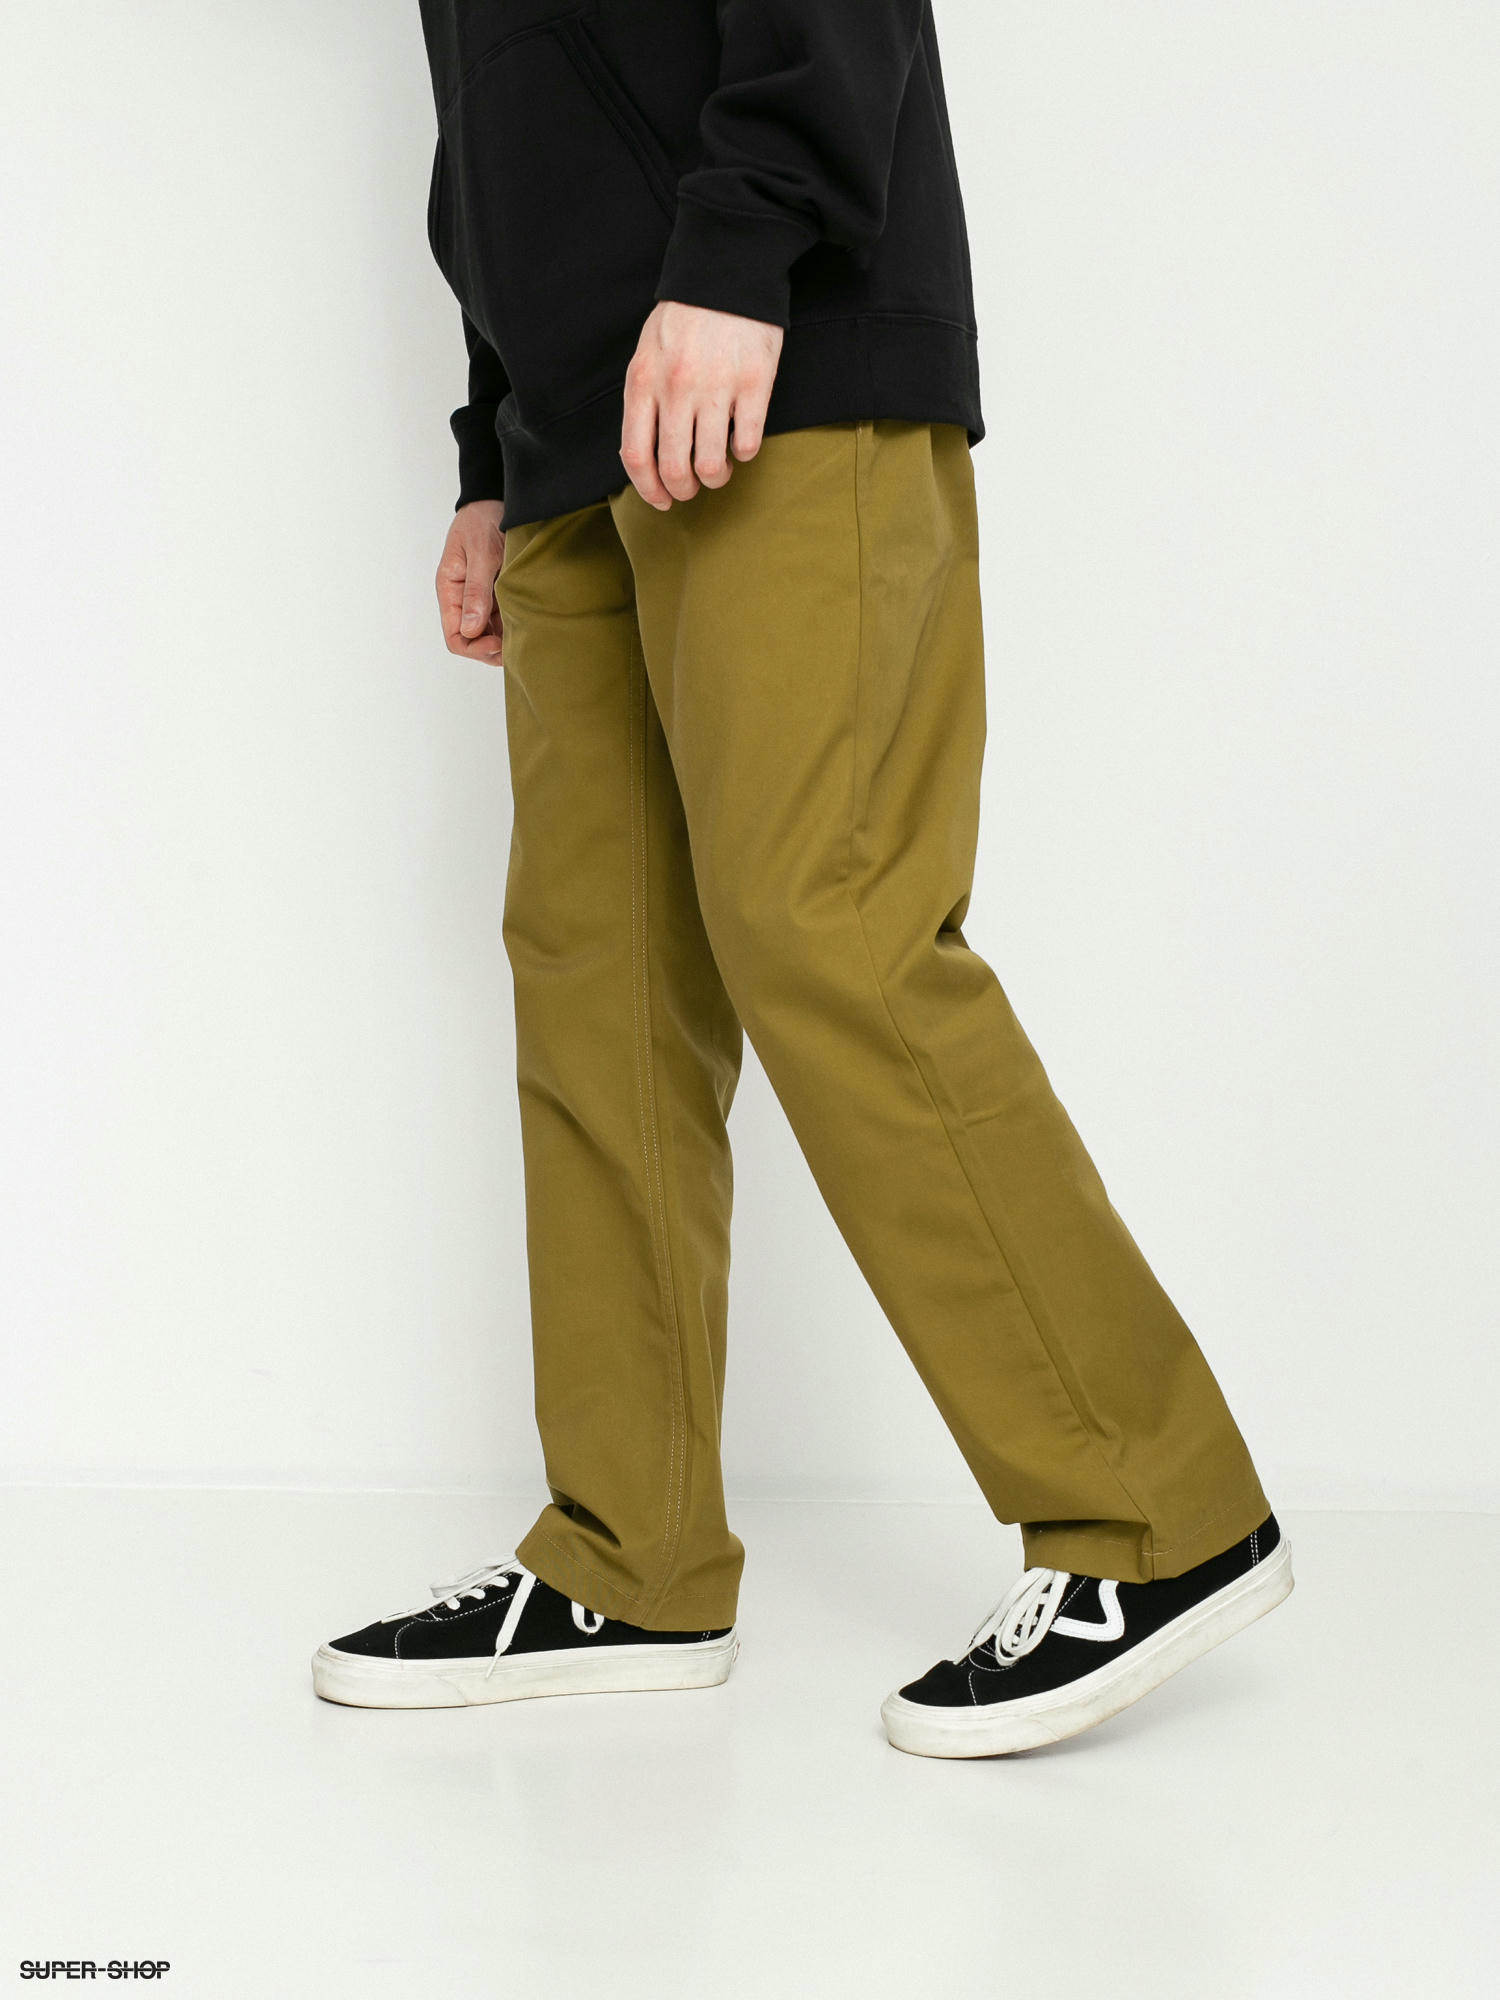 https://static.super-shop.com/1241603-vans-authentic-chino-relaxed-pants-nutria.jpg?w=1920